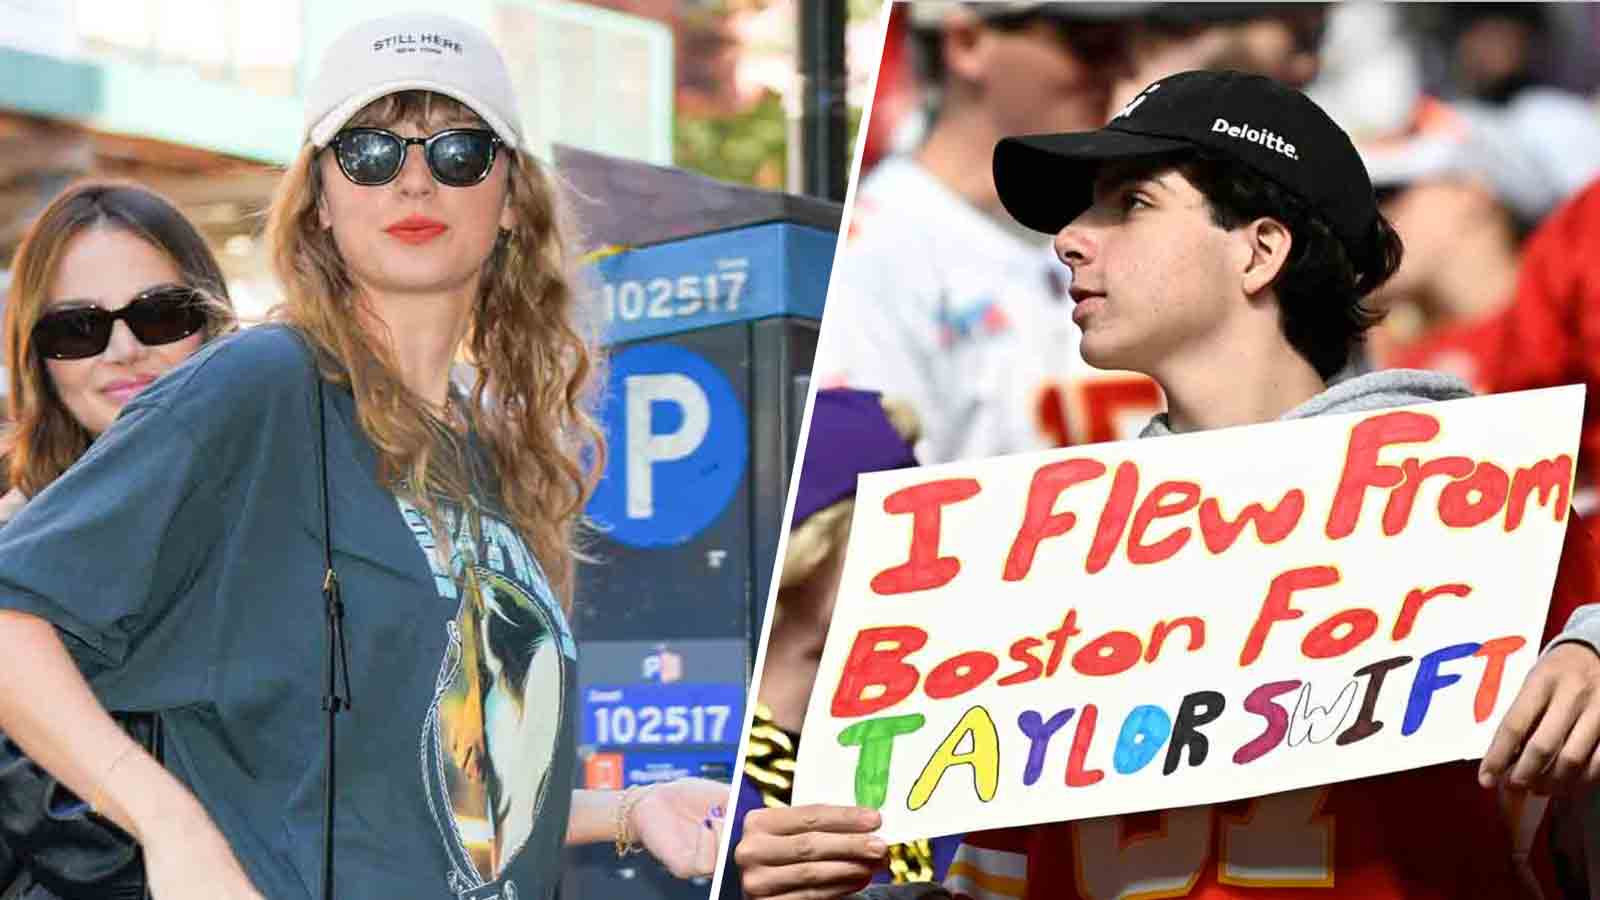 Here's Why Taylor Swift Isn't at the Chiefs vs. Eagles Game